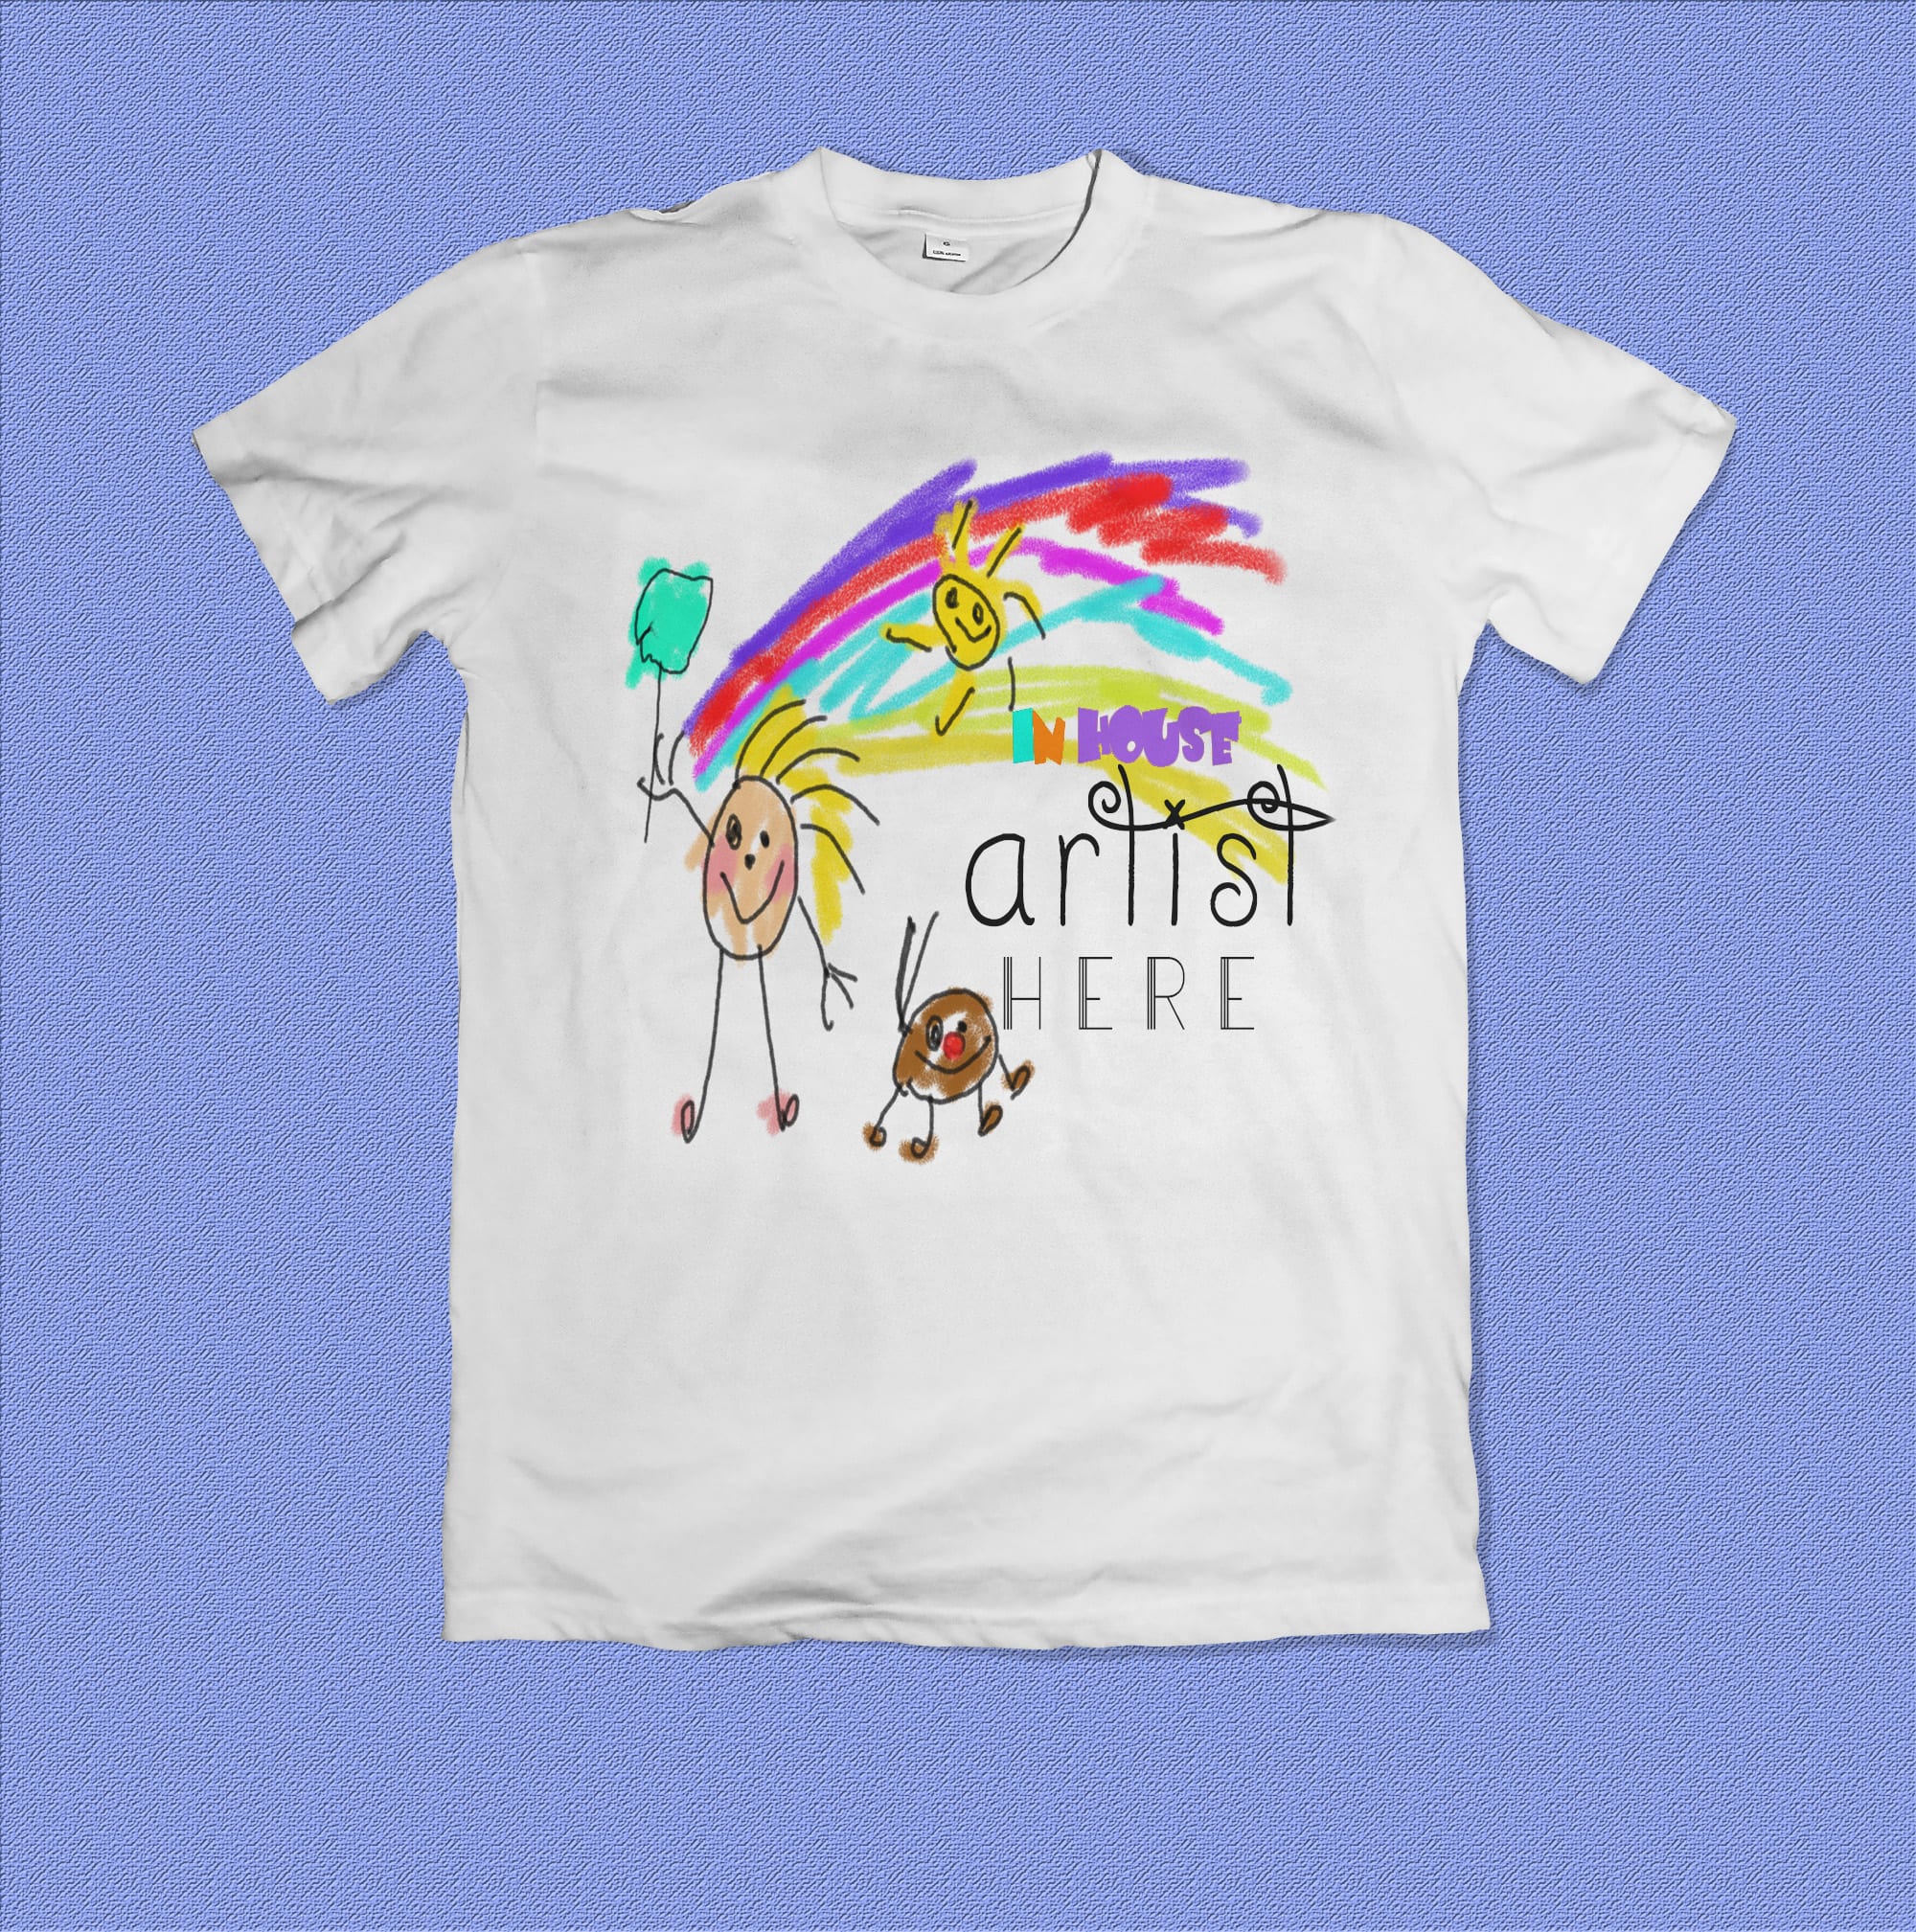 Kid's drawing on a shirt